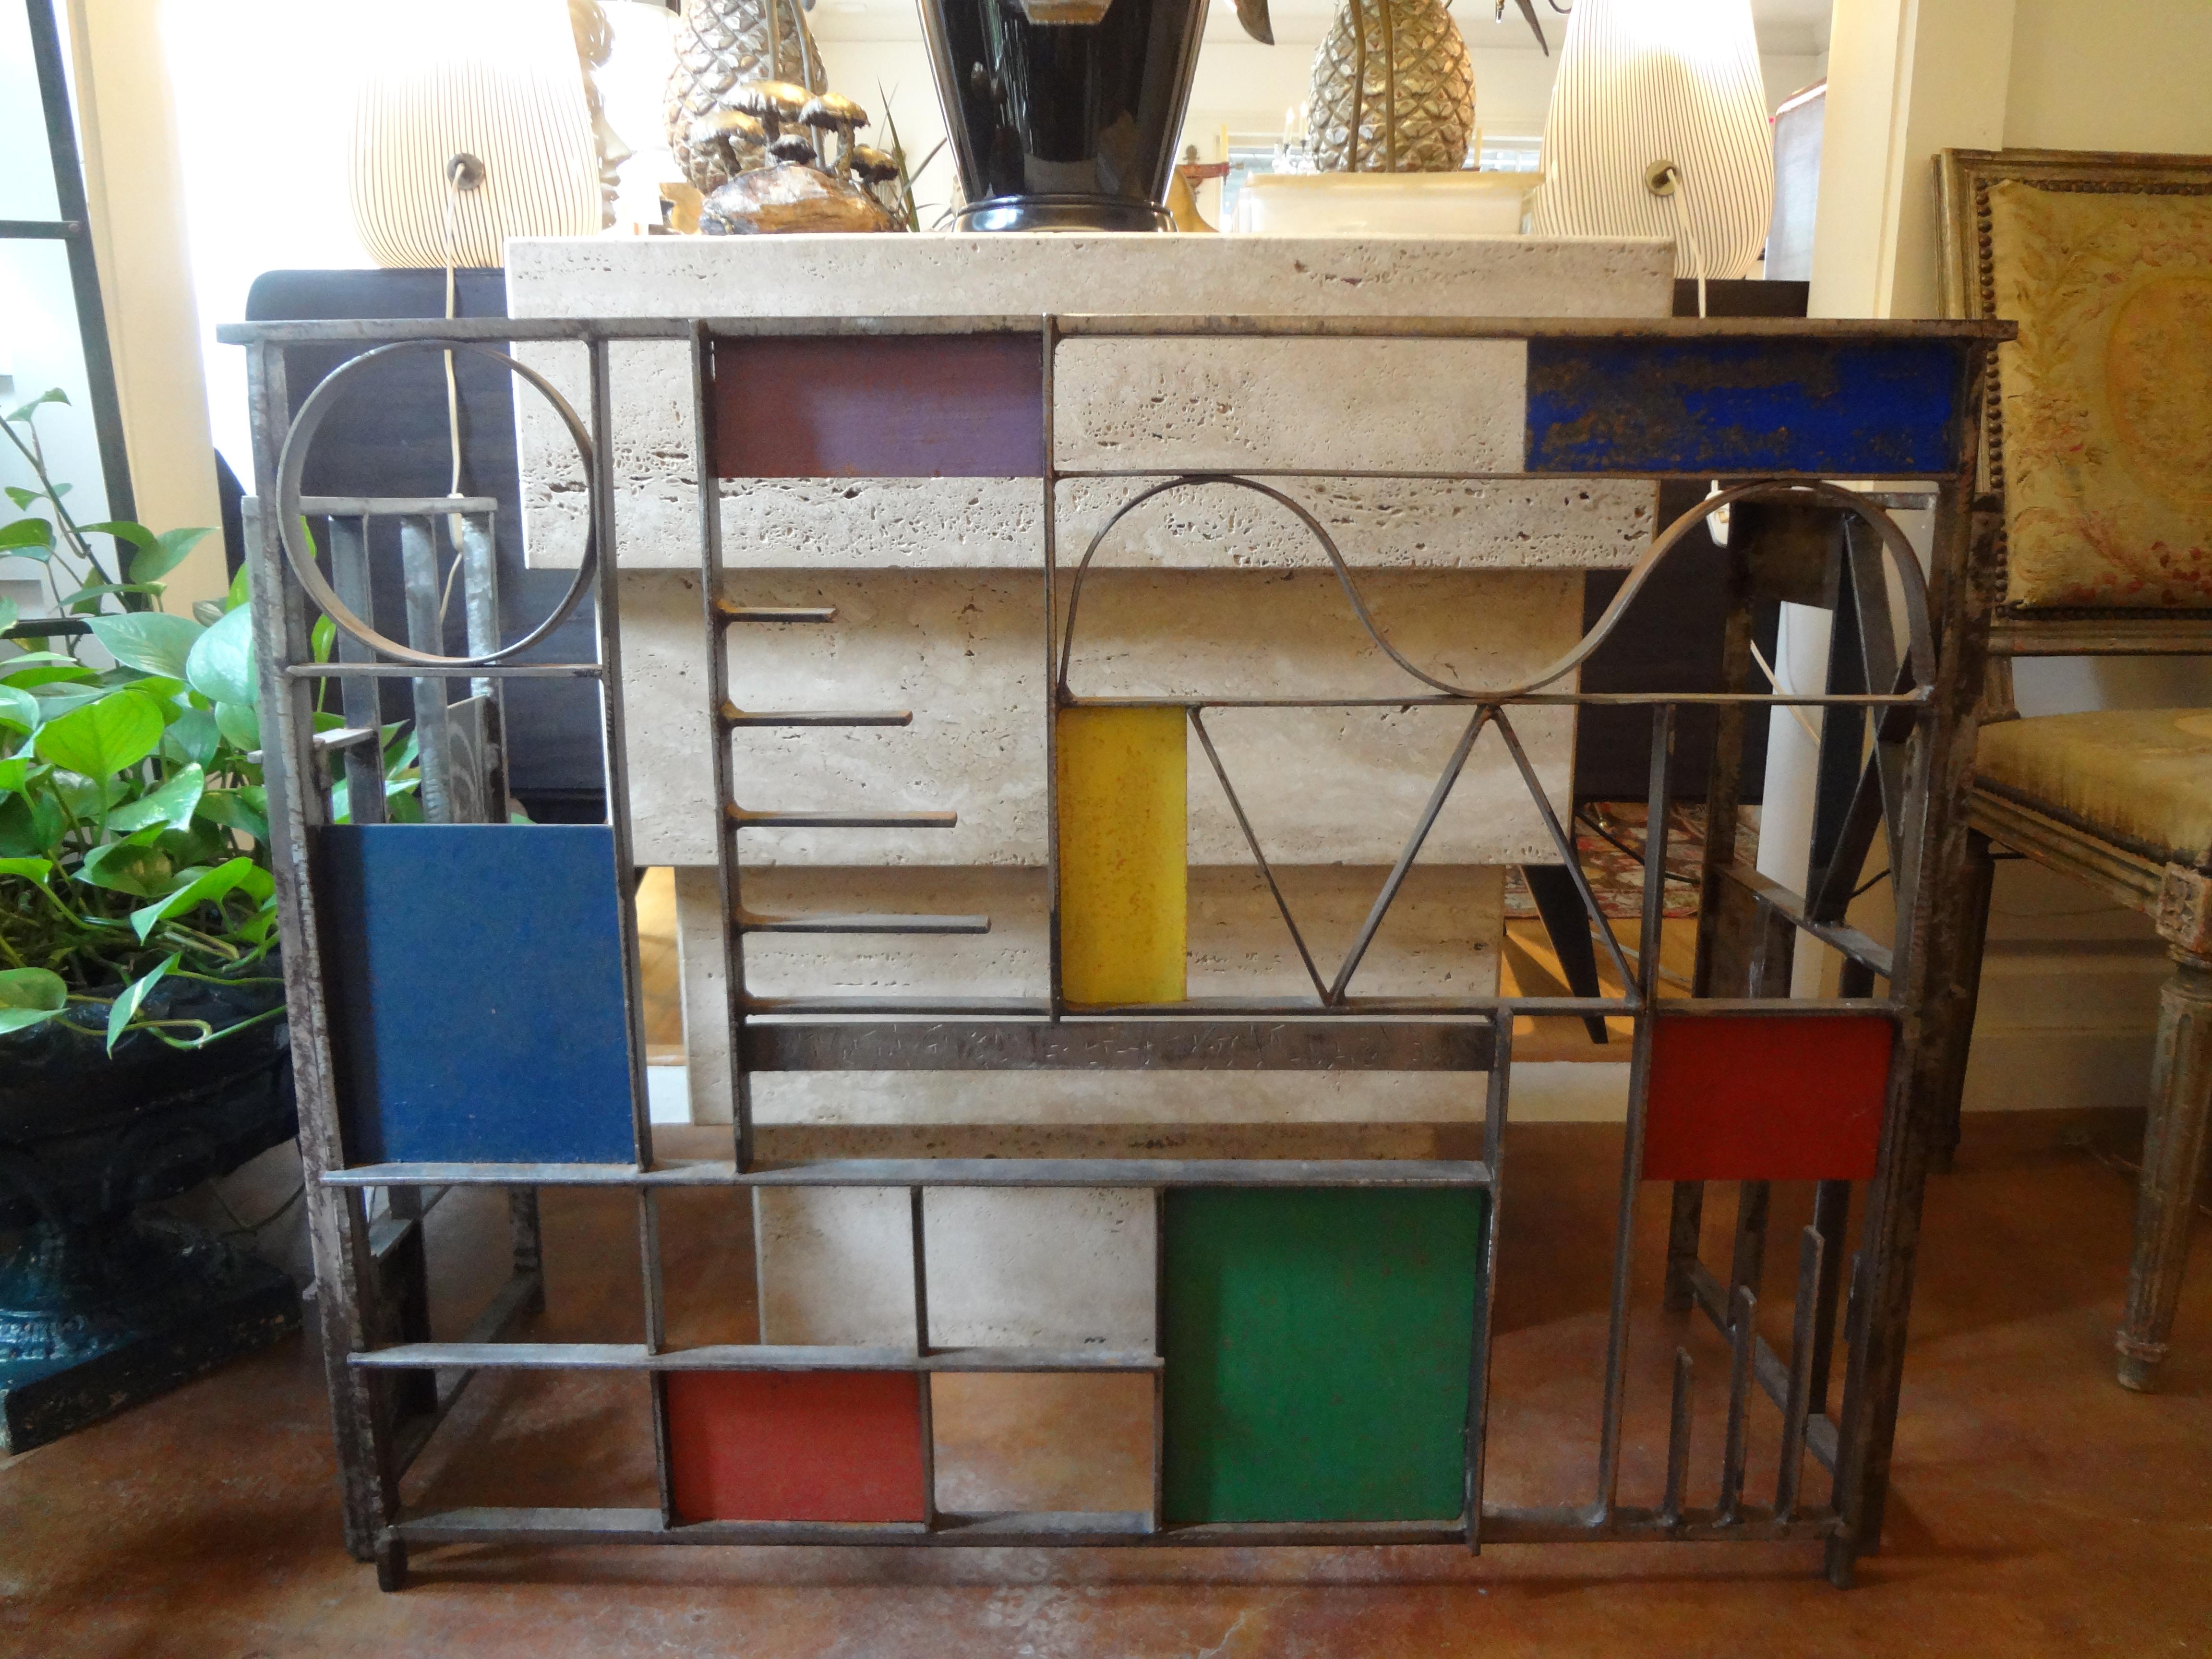 Fabulous vintage modernist or Machine Age hand forged wrought iron fireplace screen or fire screen. This beautiful artistically designed geometric fireplace screen was executed in primary colors and artist-signed, Robert Gilchrist on one of the side